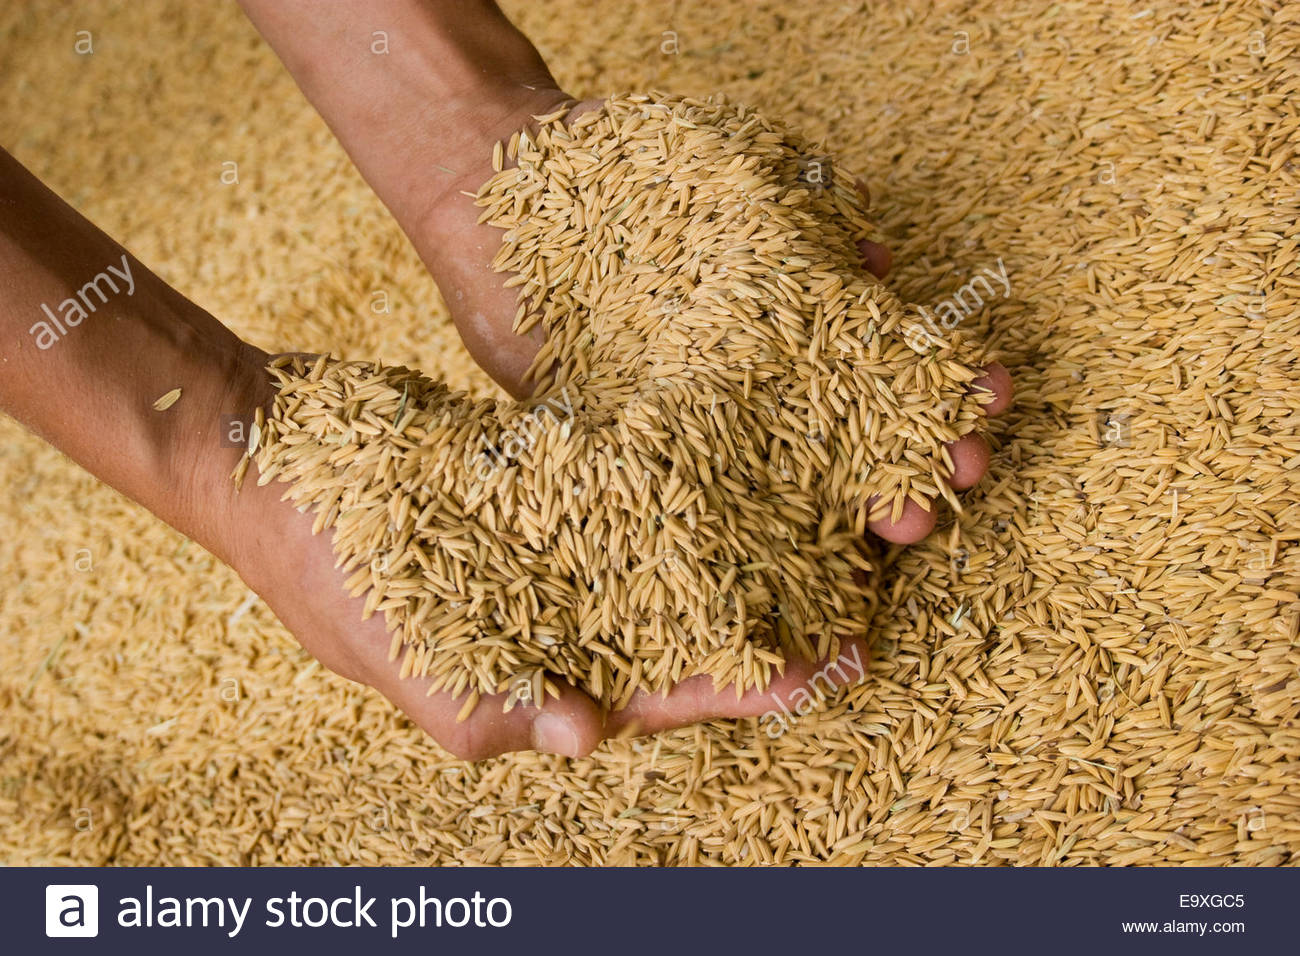 agriculture-a-farmers-hands-holding-freshly-harvested-rice-uruguay-E9XGC5.jpg